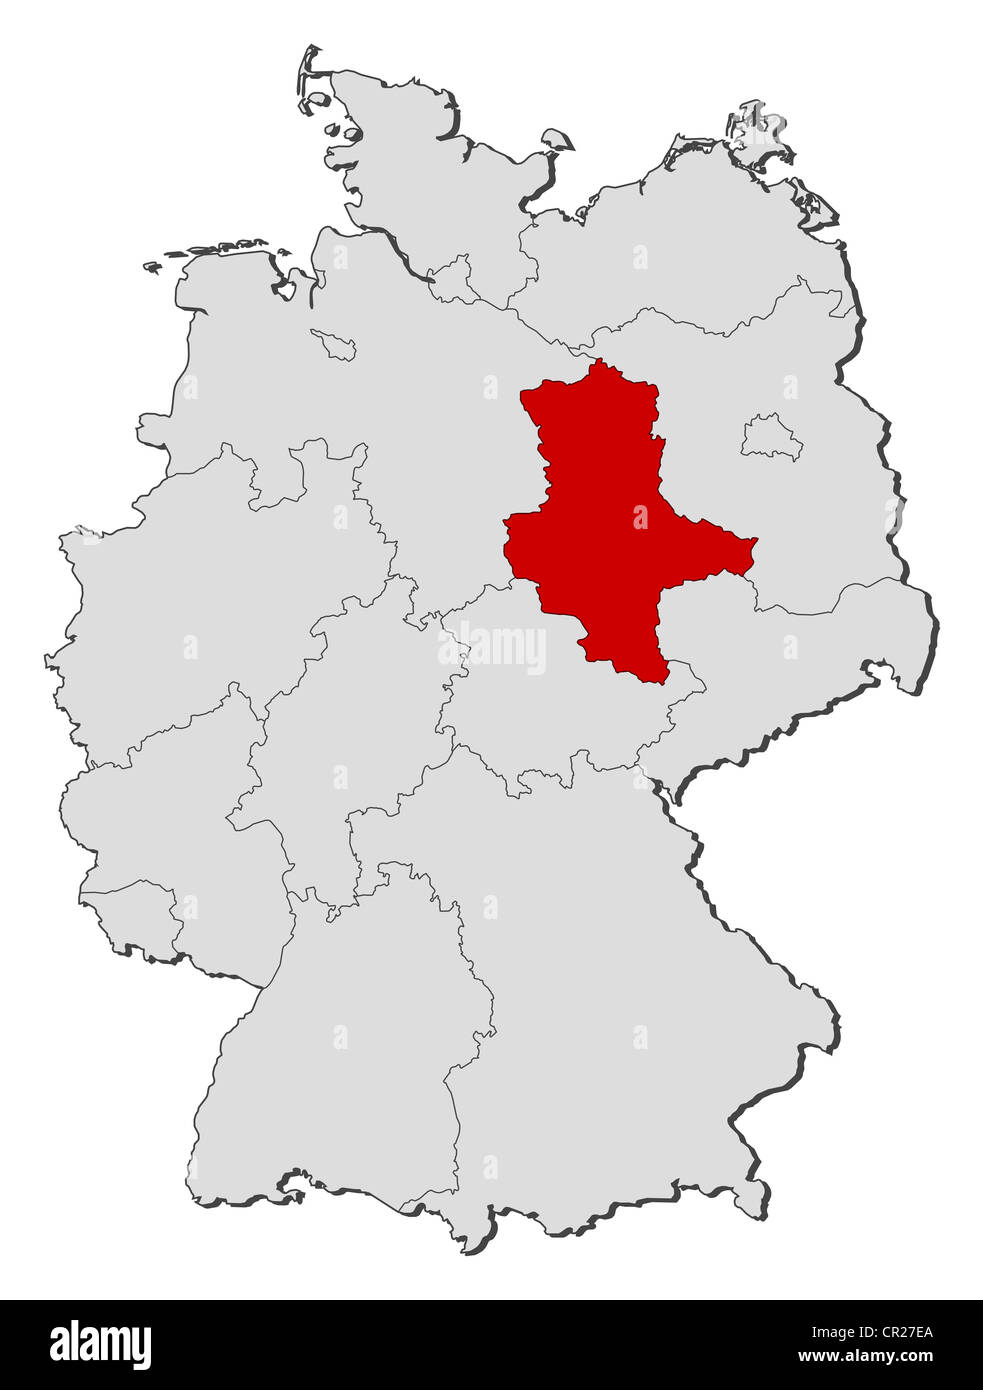 Political map of Germany with the several states where Saxony-Anhalt is highlighted. Stock Photo